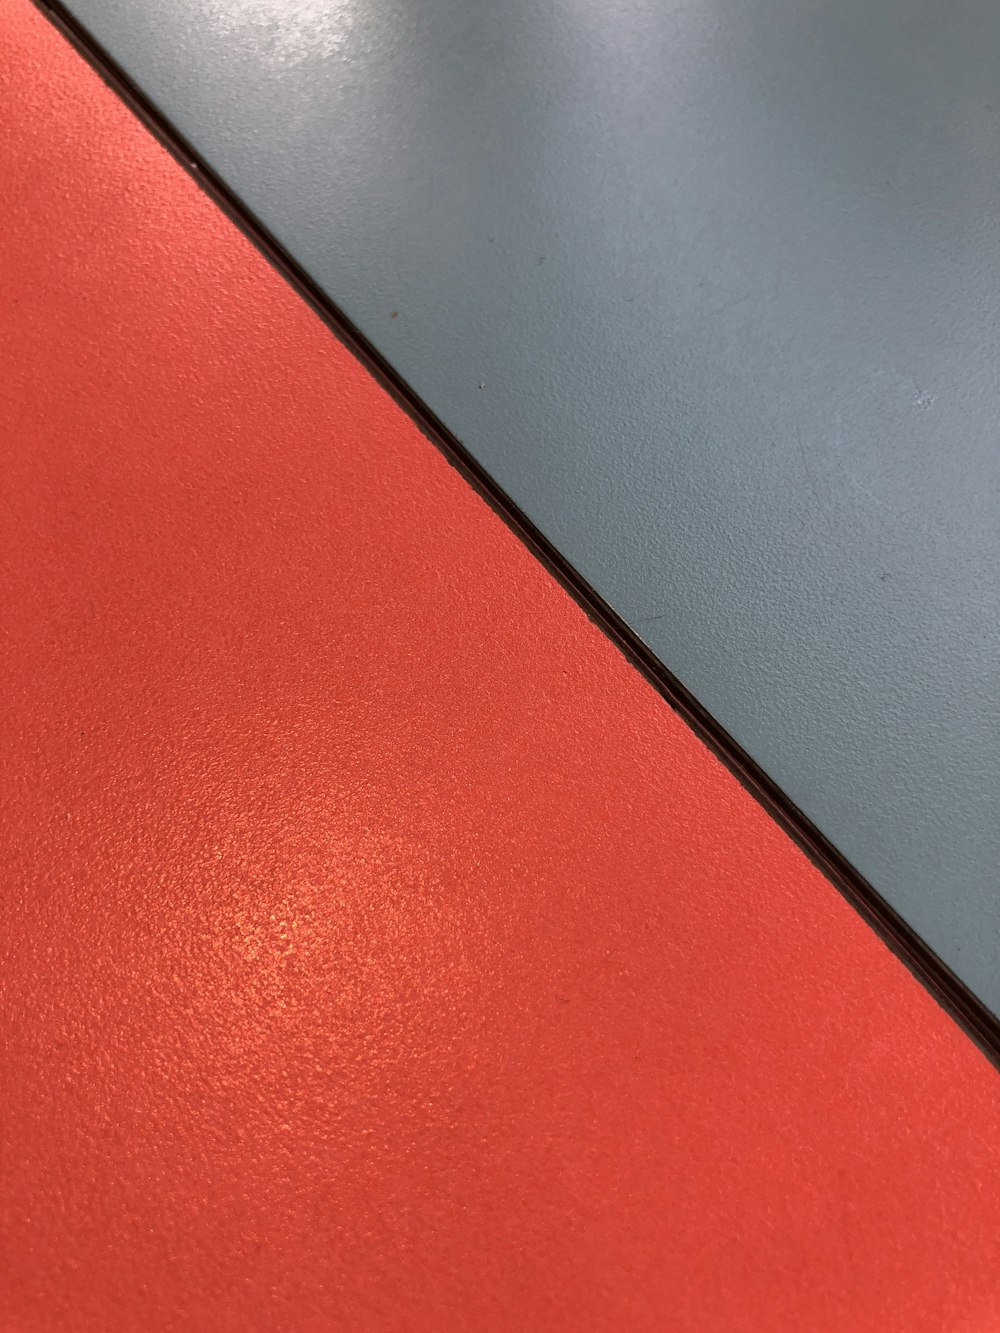 a close up of a red and grey surface